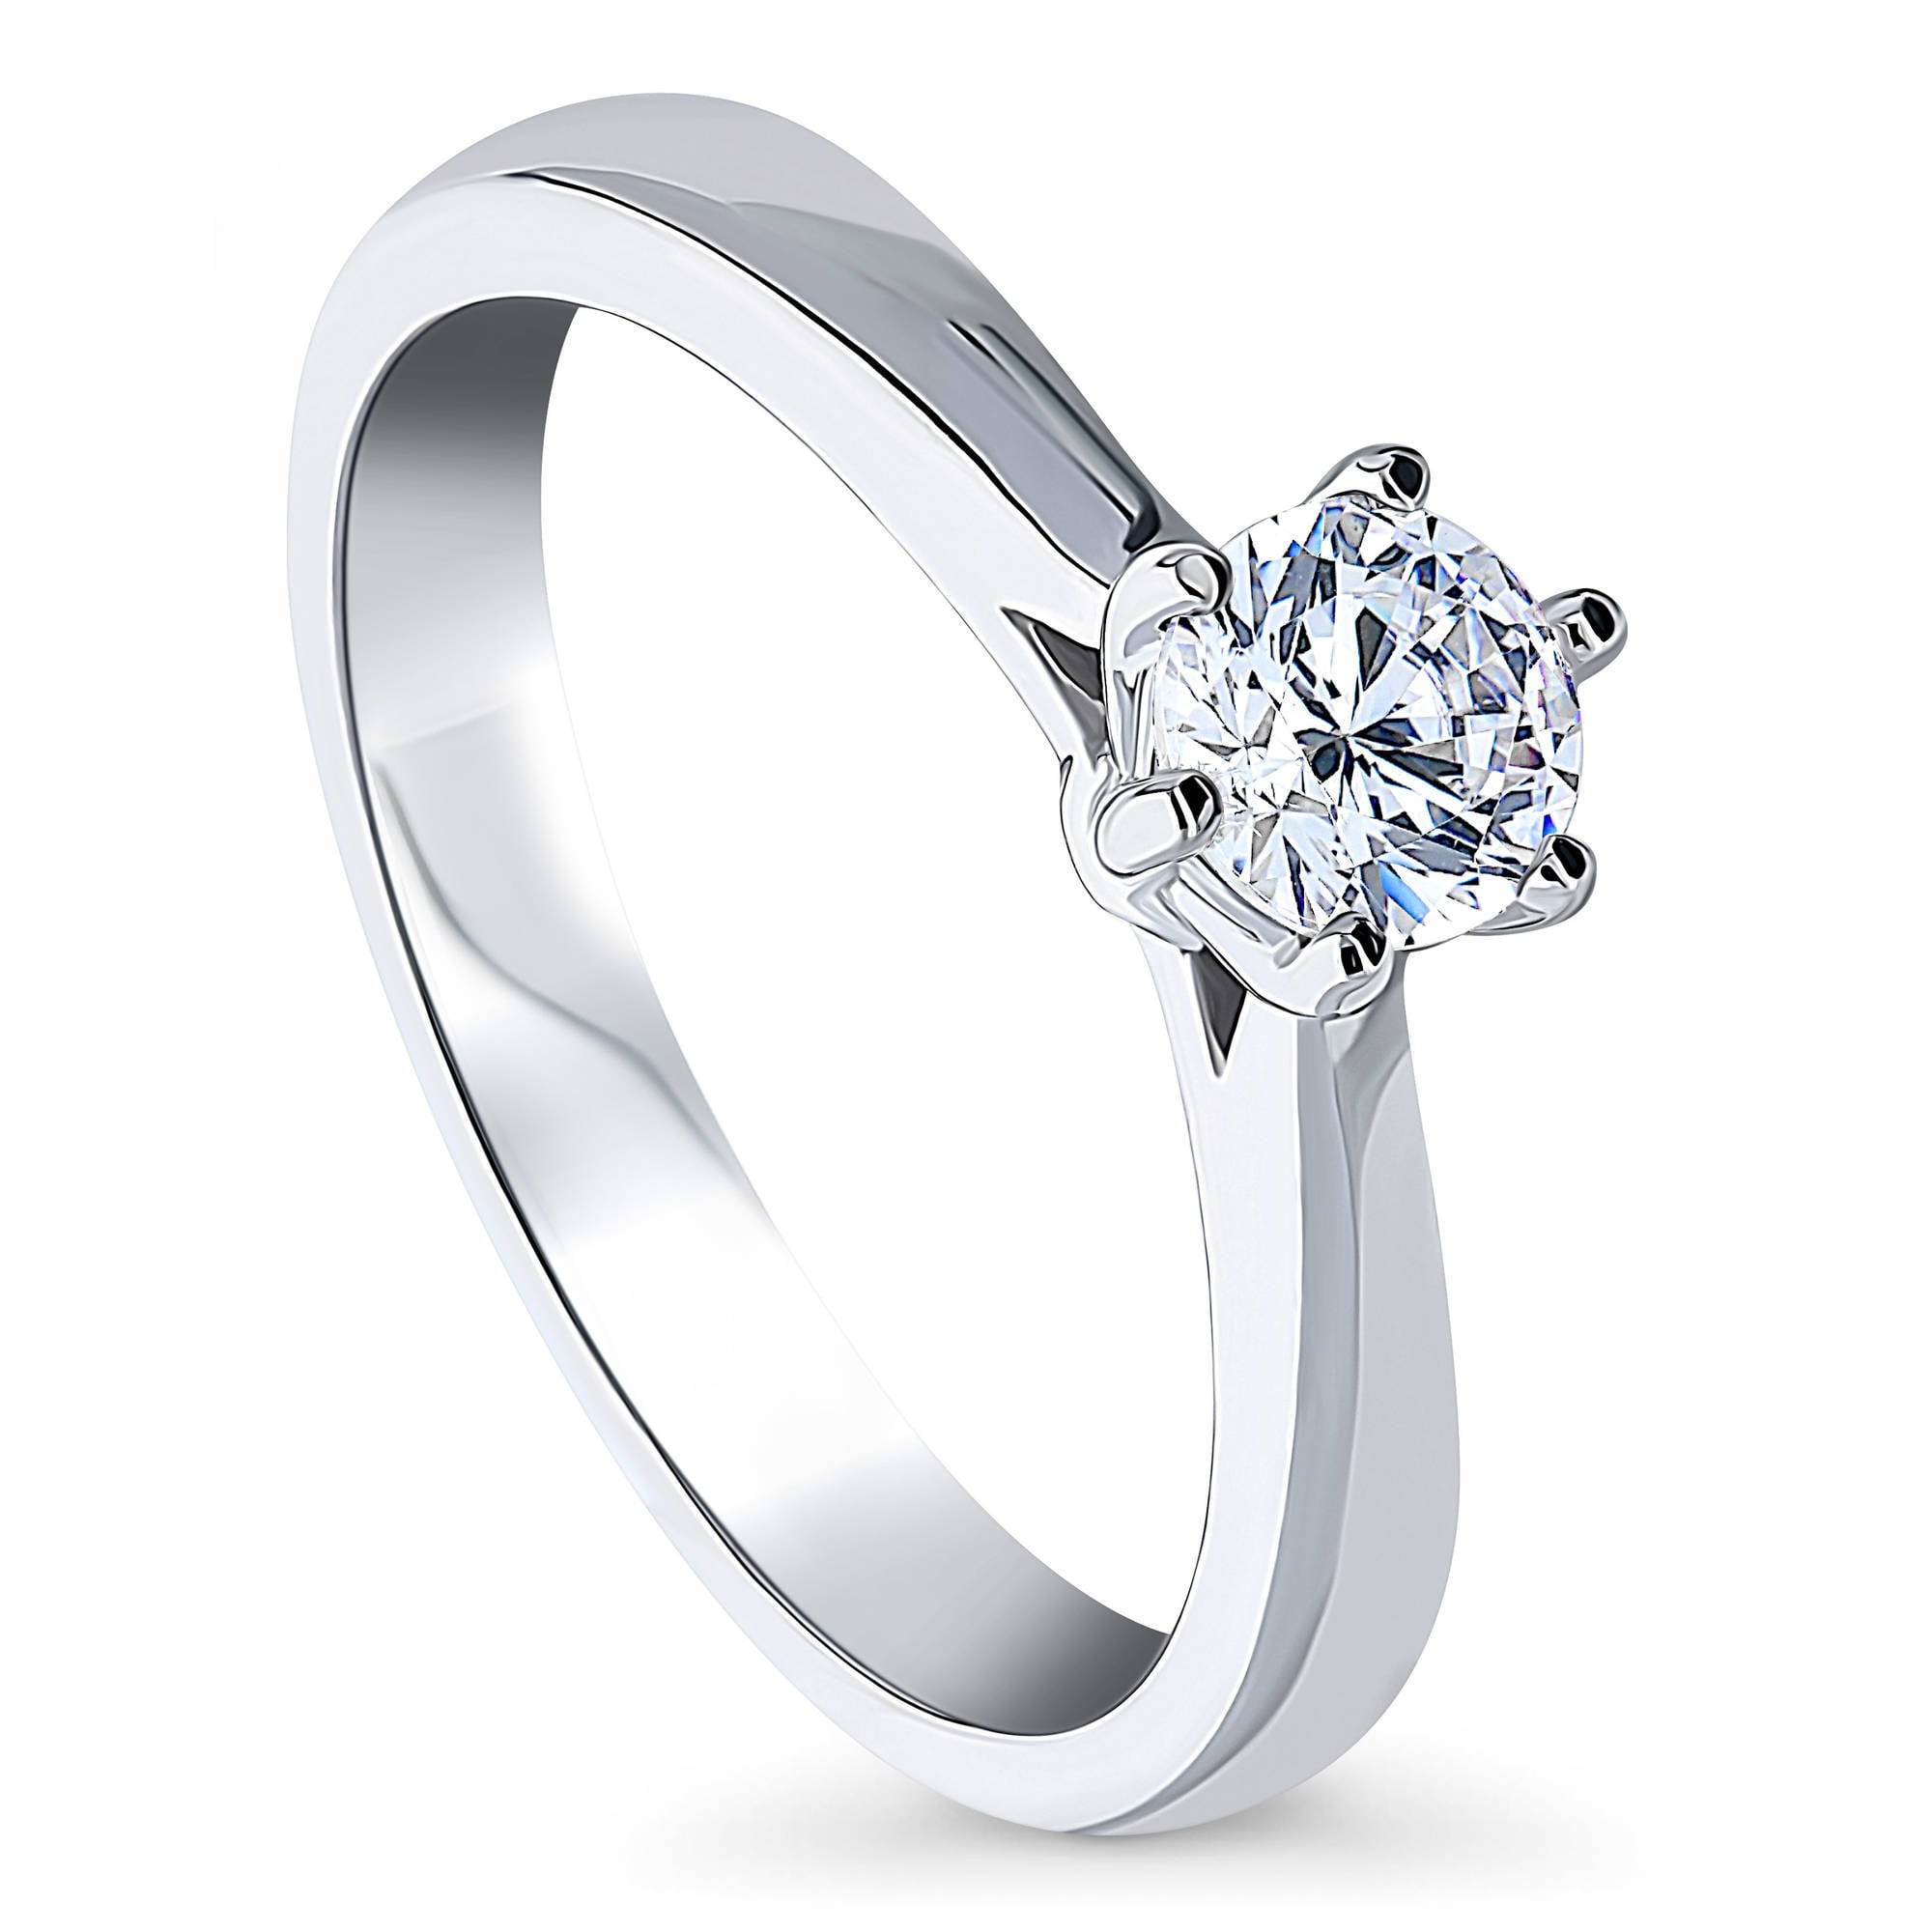 Sterling Silver Solitaire Ring Engagement 7mm Clear Round 1.25ct CZ Cubic Zircon 